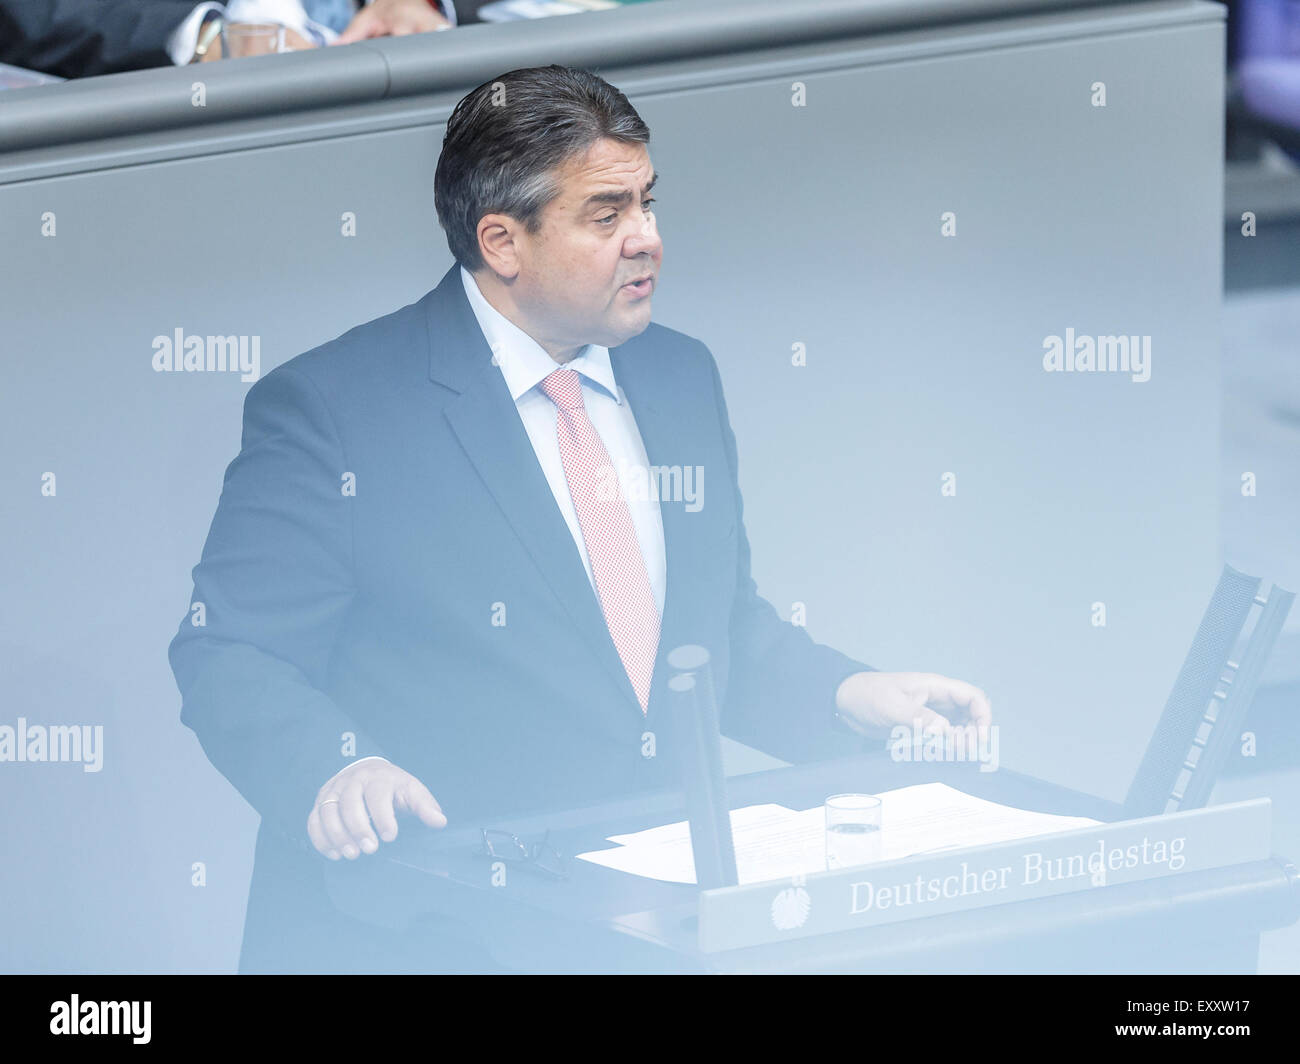 Berlin, Germany. 17th July, 2015. Special session of the German Parliament - consultation of government on the ' negotiations of the Government Federal relative to the concession of financial support for the Hellenic Republic of Greece ' realized at the German Parliament on 17.07.2015 in Berlin, Germany. / Picture: Sigmar Gabriel (SPD), German Minister of Economy and Energy, during his speech at the session of the german Parliament relative to the concession of financial support for the Hellenic Republic of Greece. Credit:  Reynaldo Chaib Paganelli/Alamy Live News Stock Photo